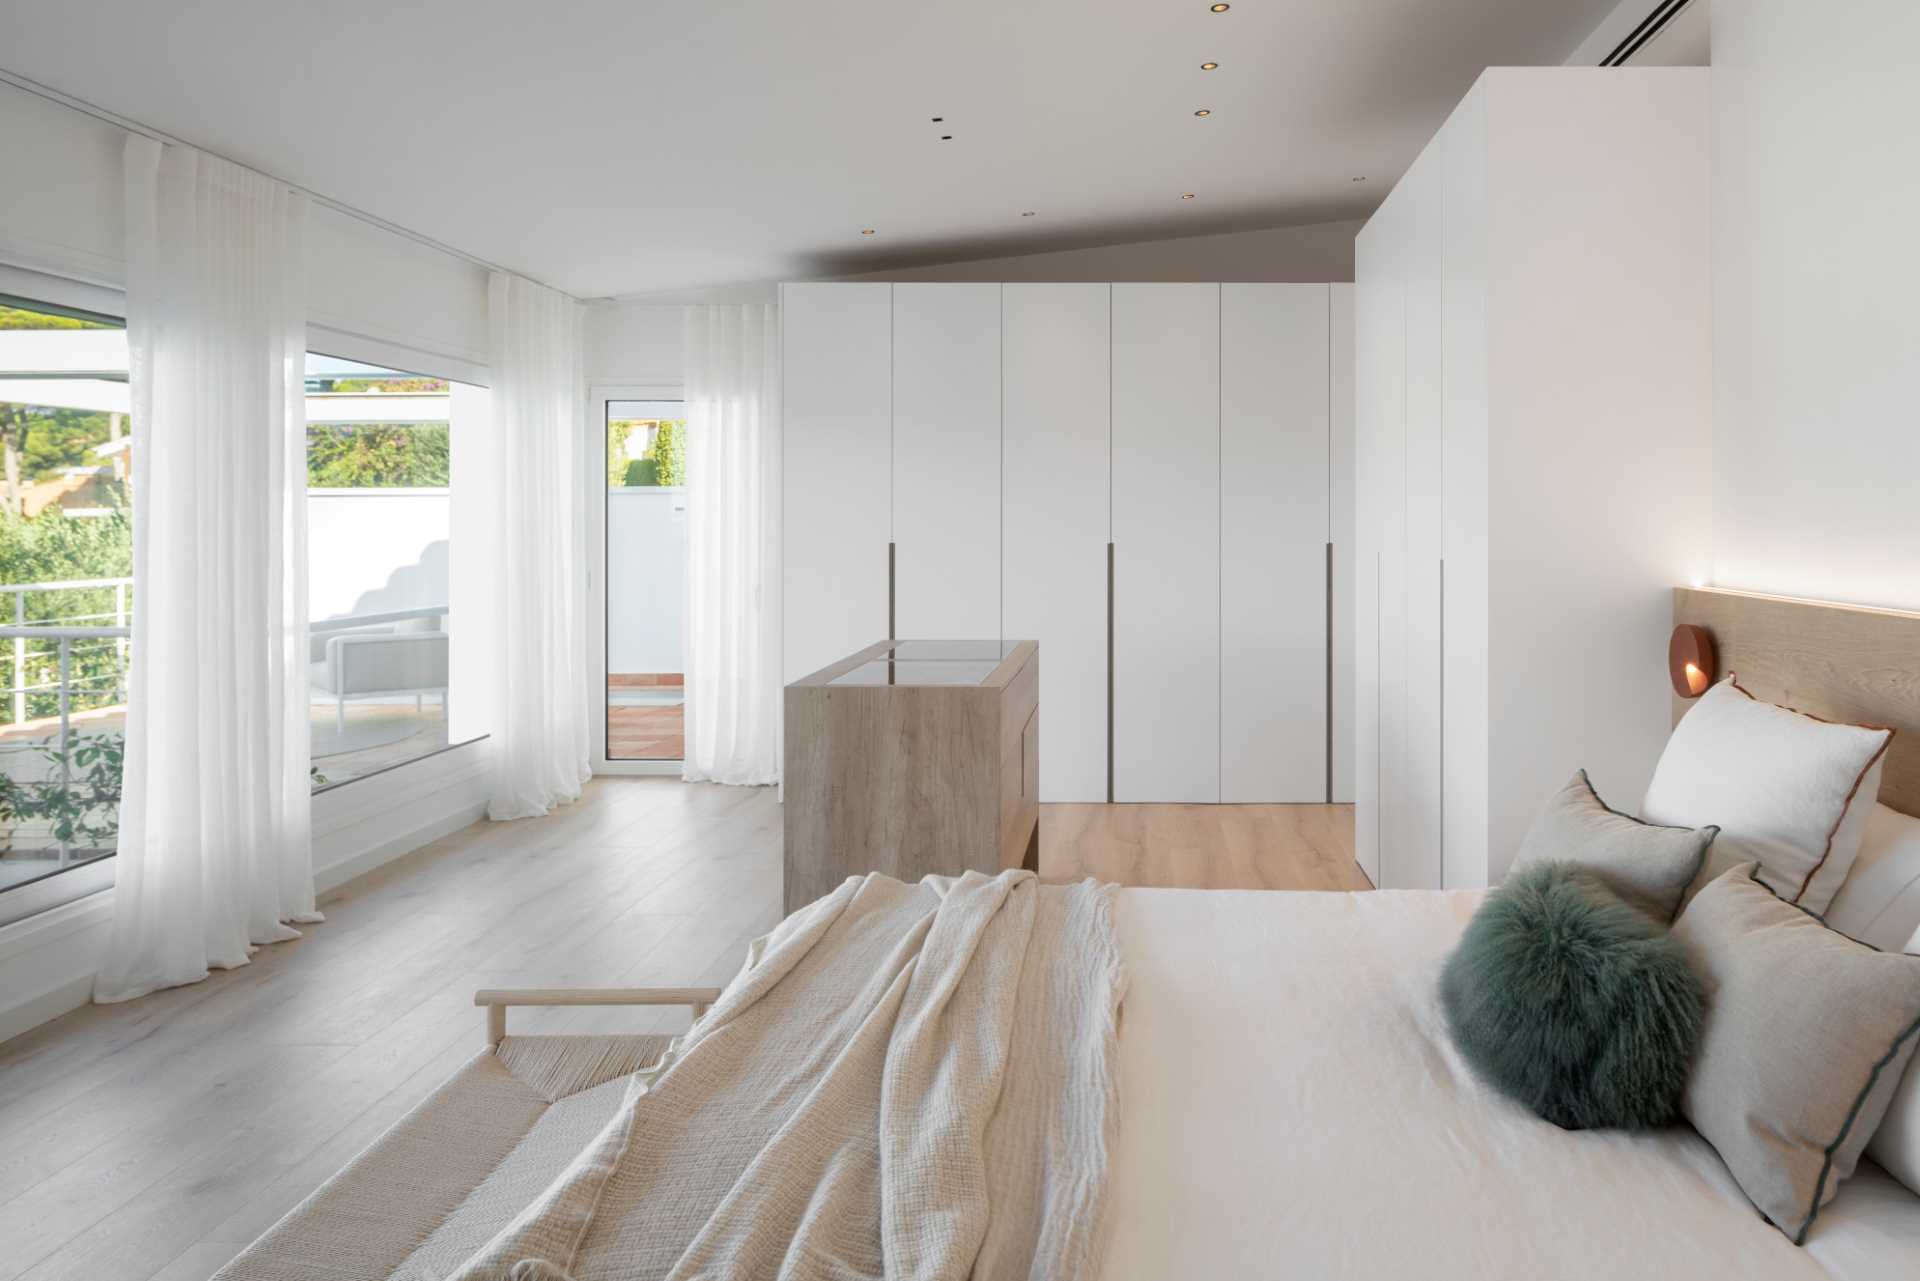 A modern white bedroom with oak floors and white closets.